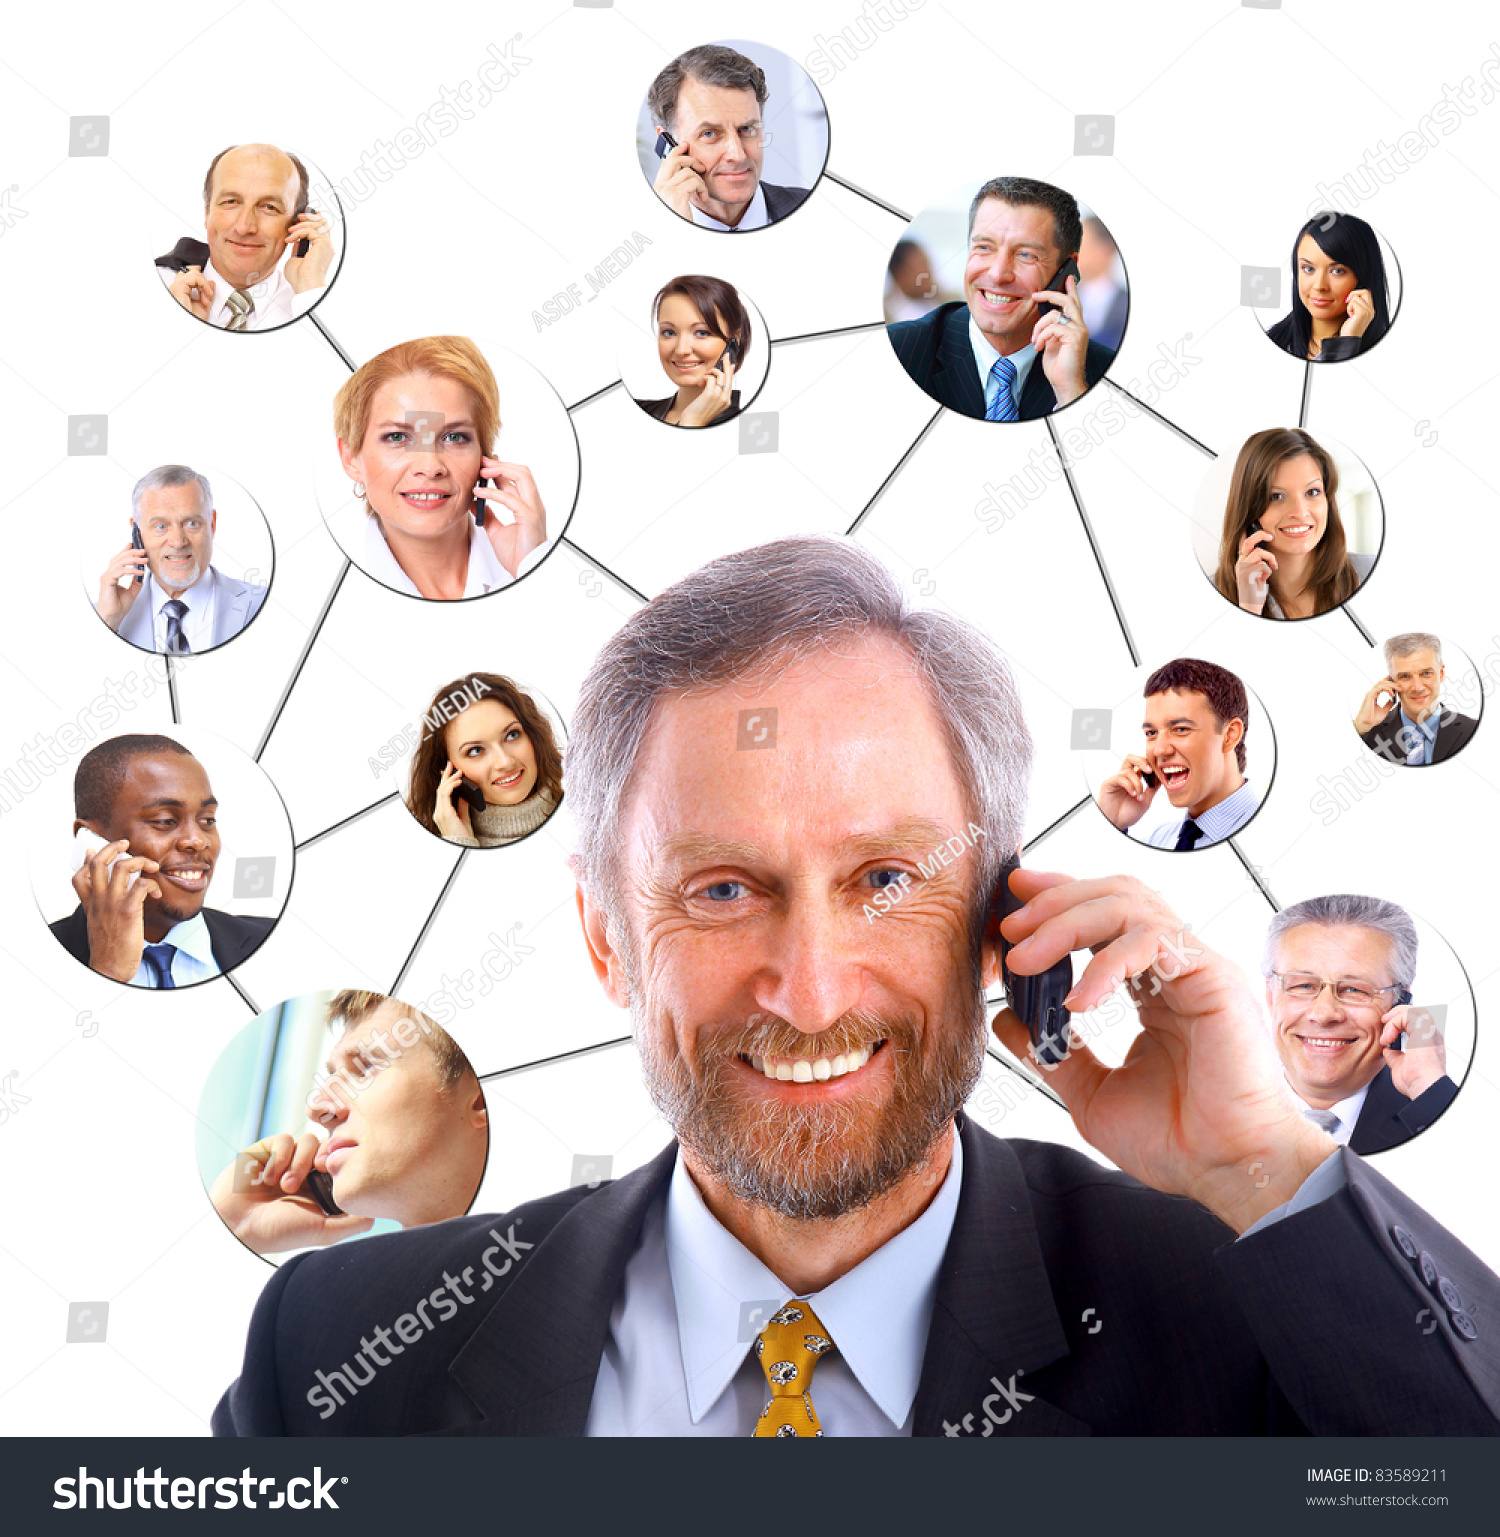 stock-photo-a-collage-of-diverse-business-people-talking-on-the-phone-83589211.jpg